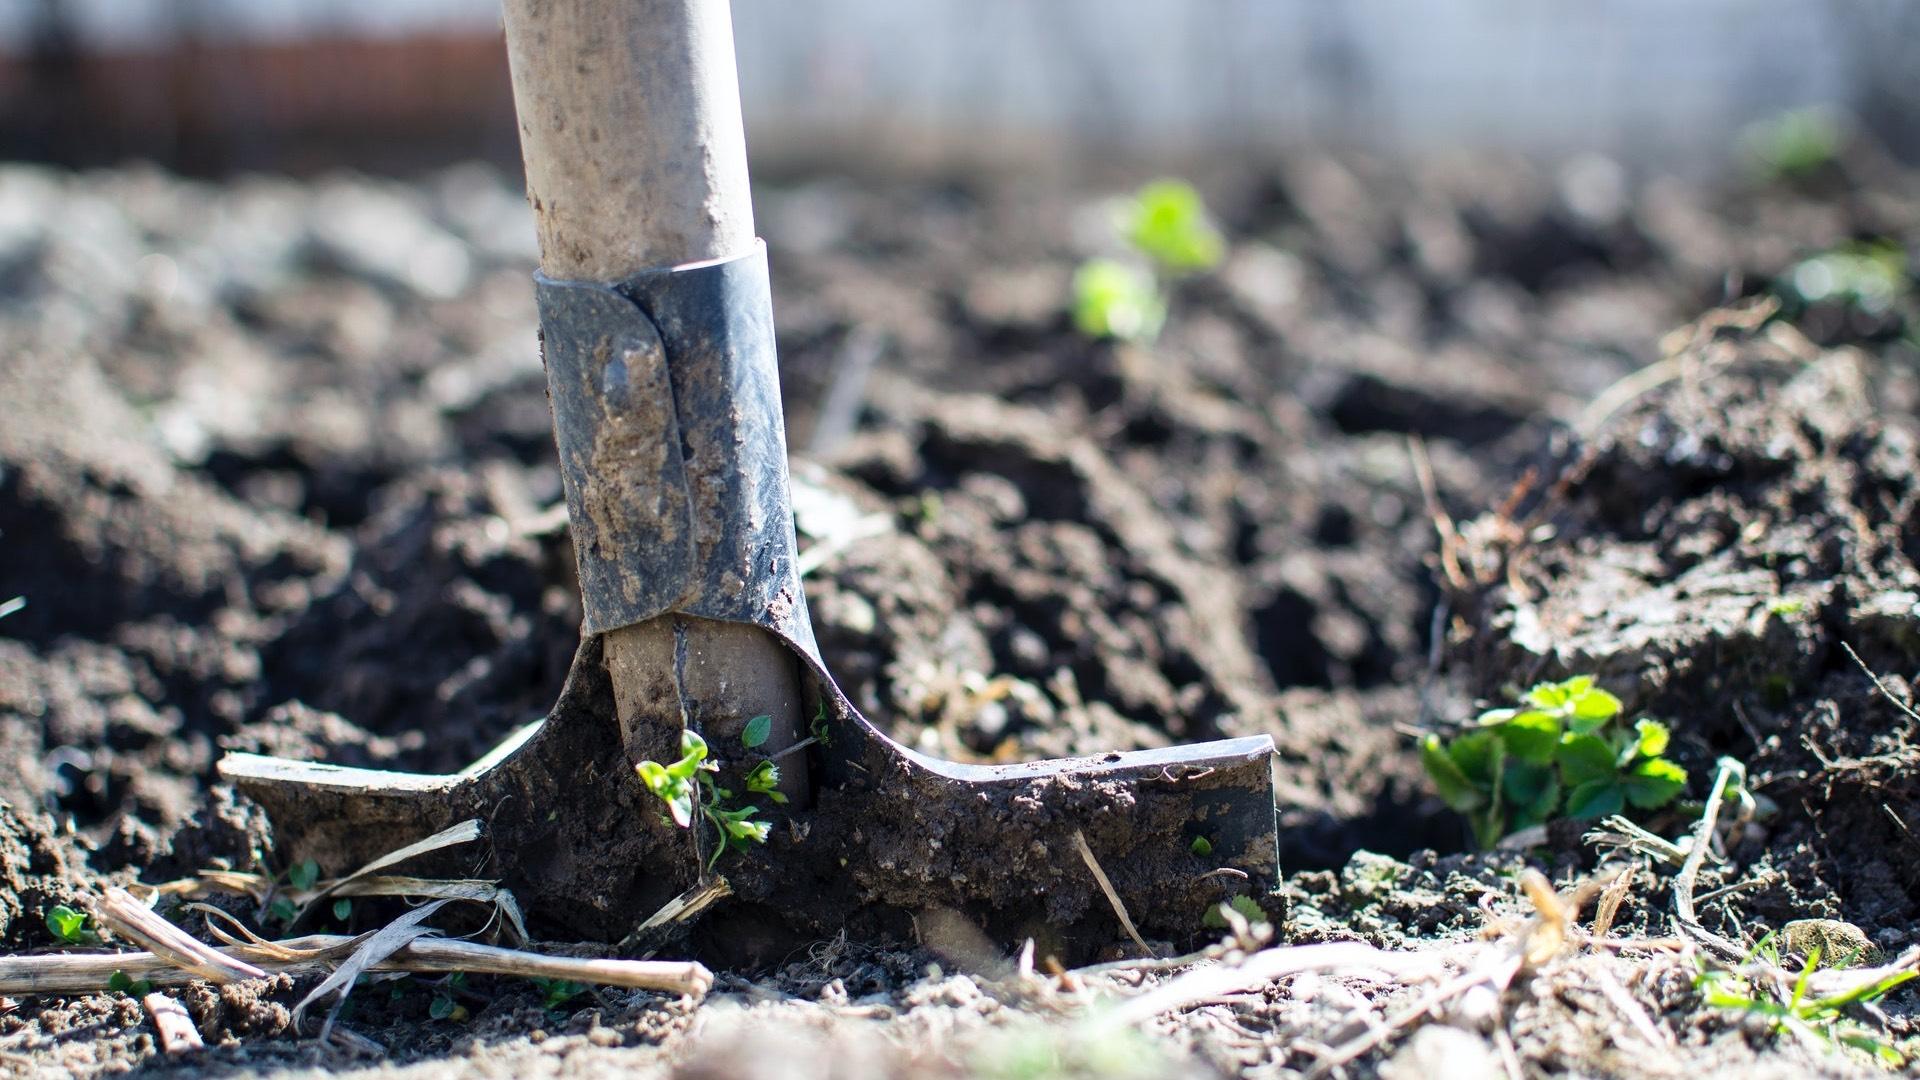 Mid-to-late May is the safest bet for most planting in Chicago. (Lukas / Pexels)